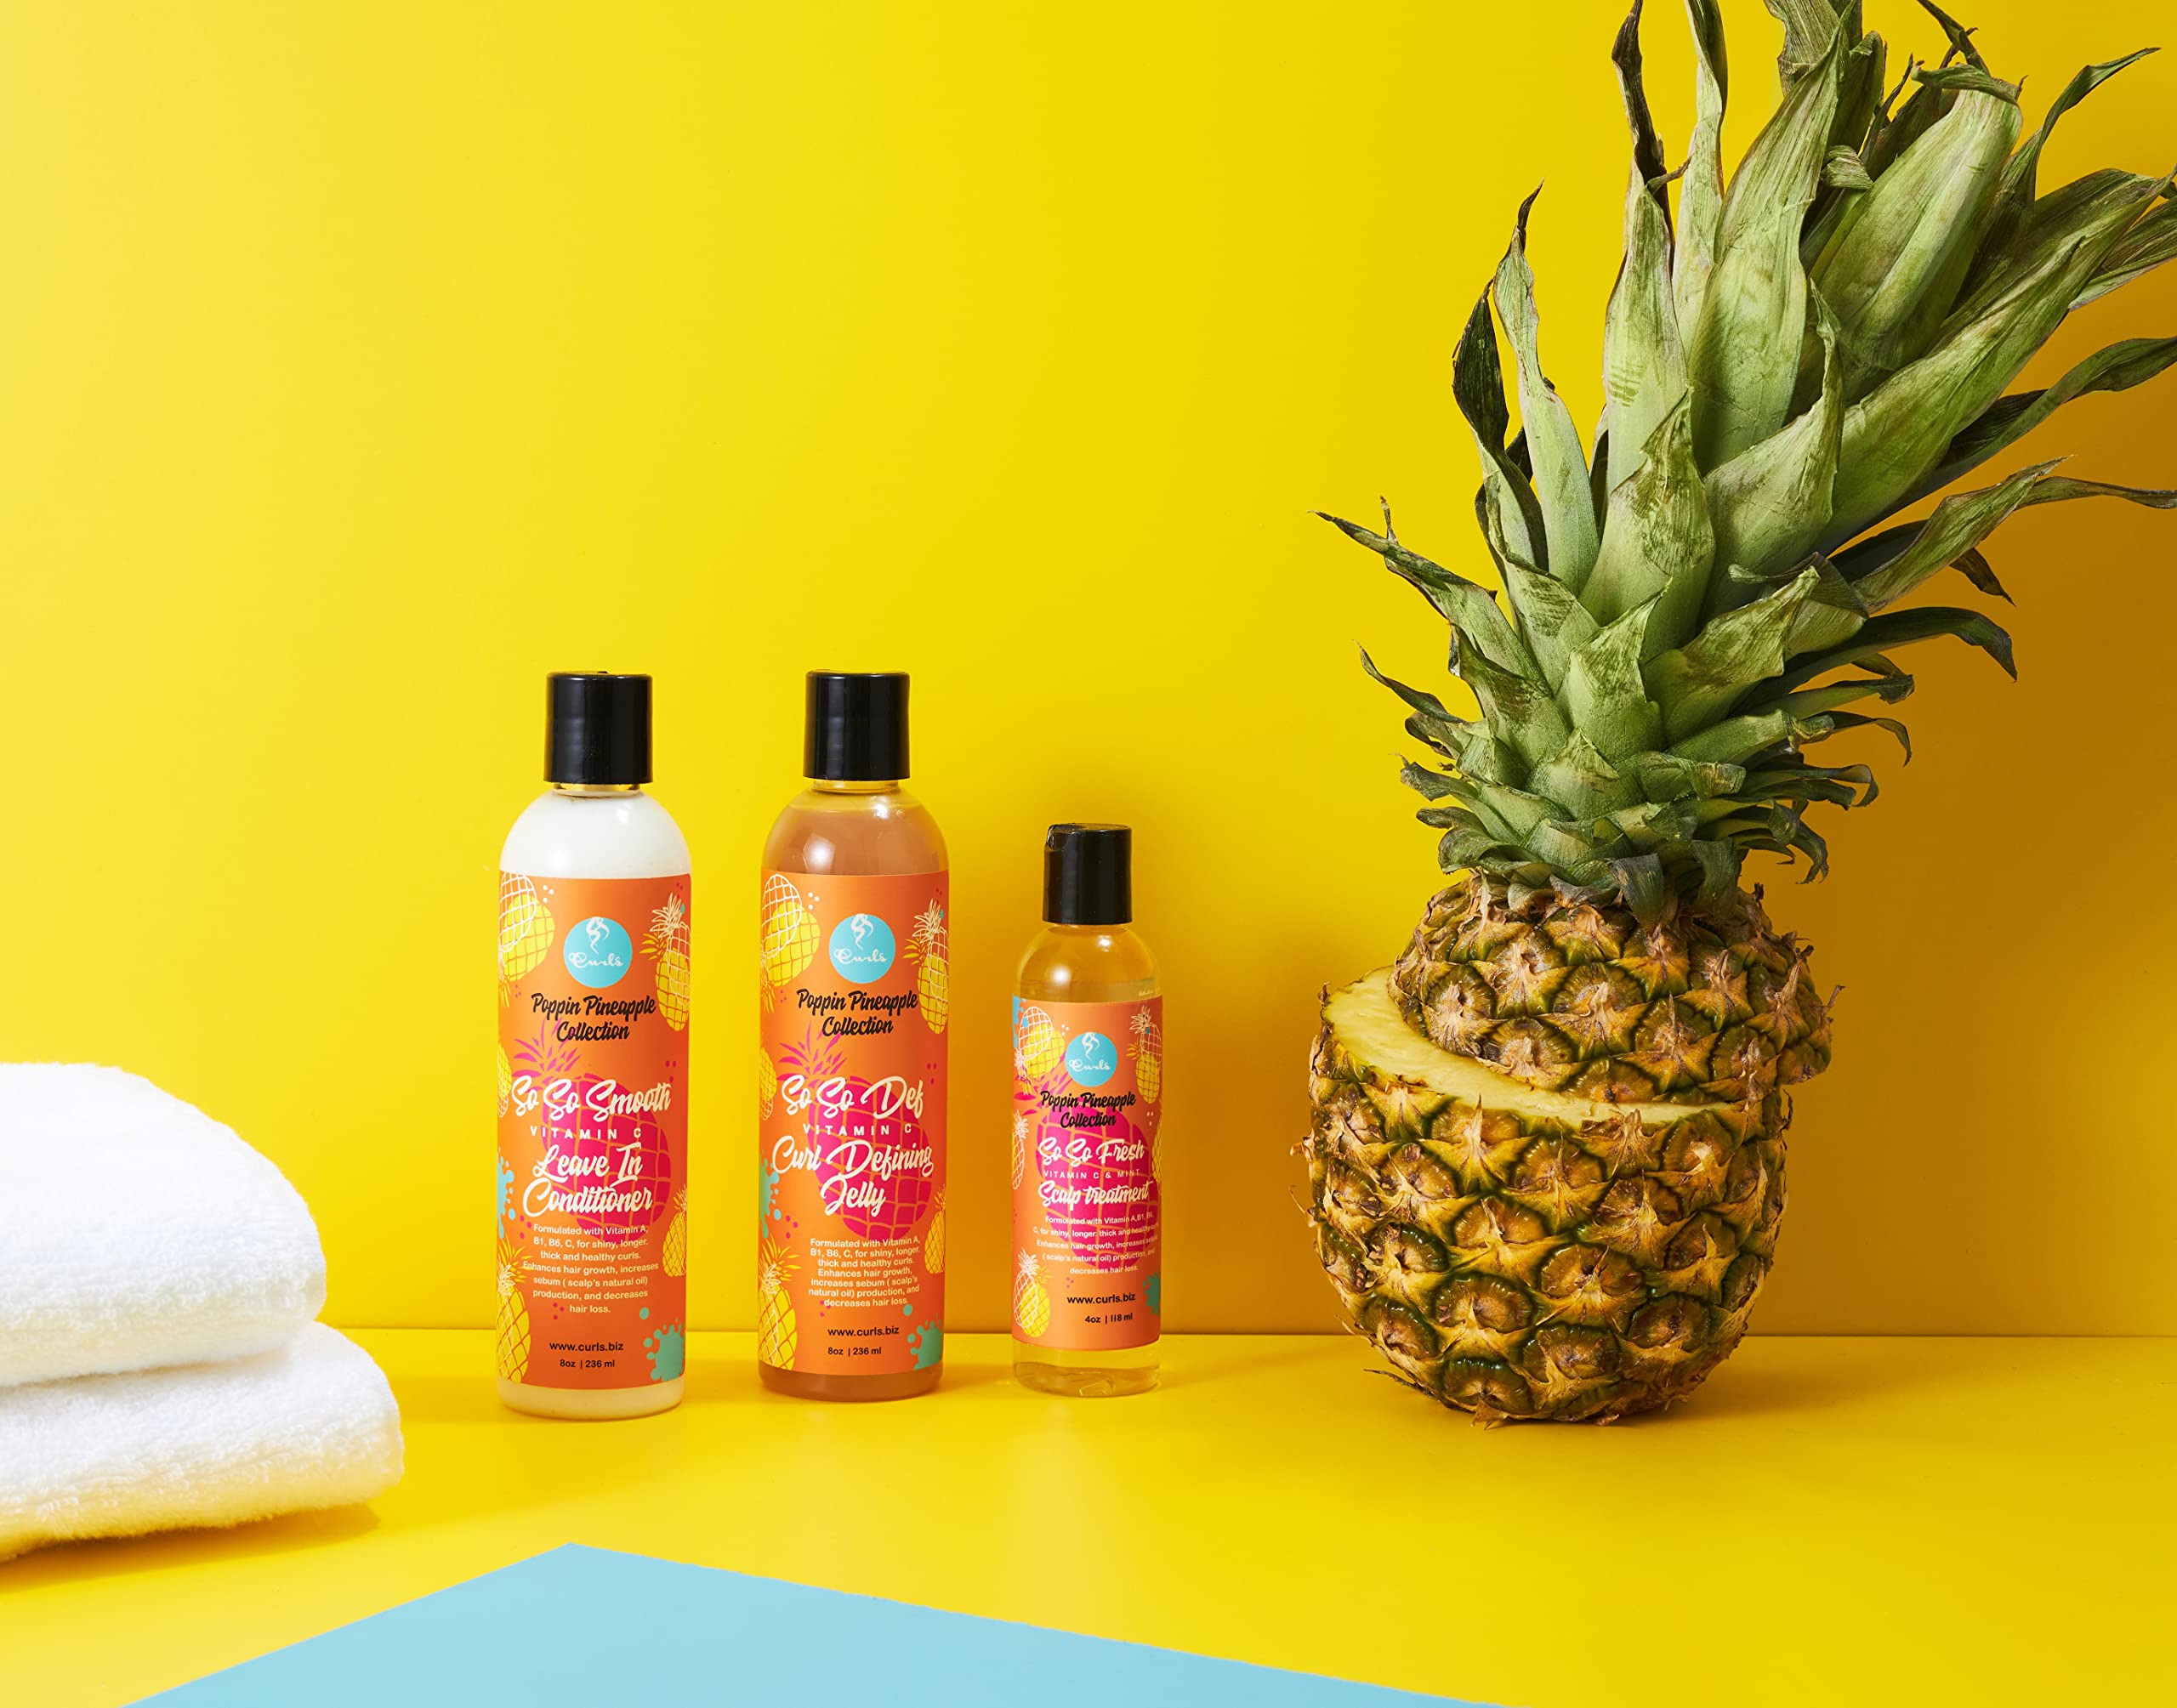 Curls Poppin Pineapple So So Smooth Vitamin C Leave In Conditioner- For Shiny, Longer, Thick & Healthy Hair - Protein Free Formula - For All Types, 8 Ounces